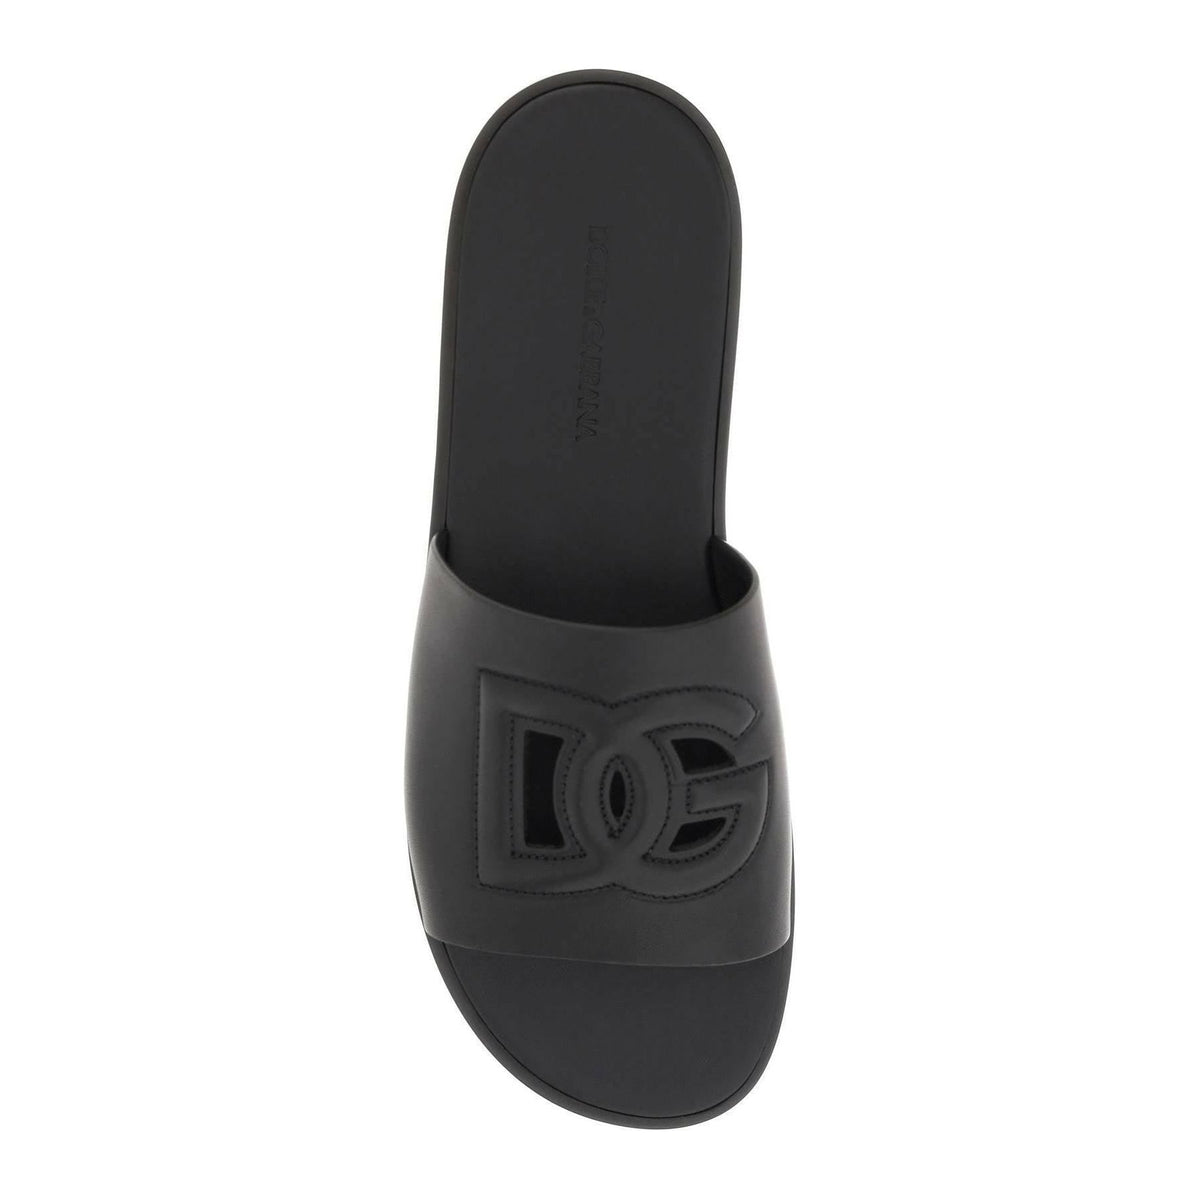 DOLCE & GABBANA - Black Leather Slides With Quilted Dg Cut Out - JOHN JULIA